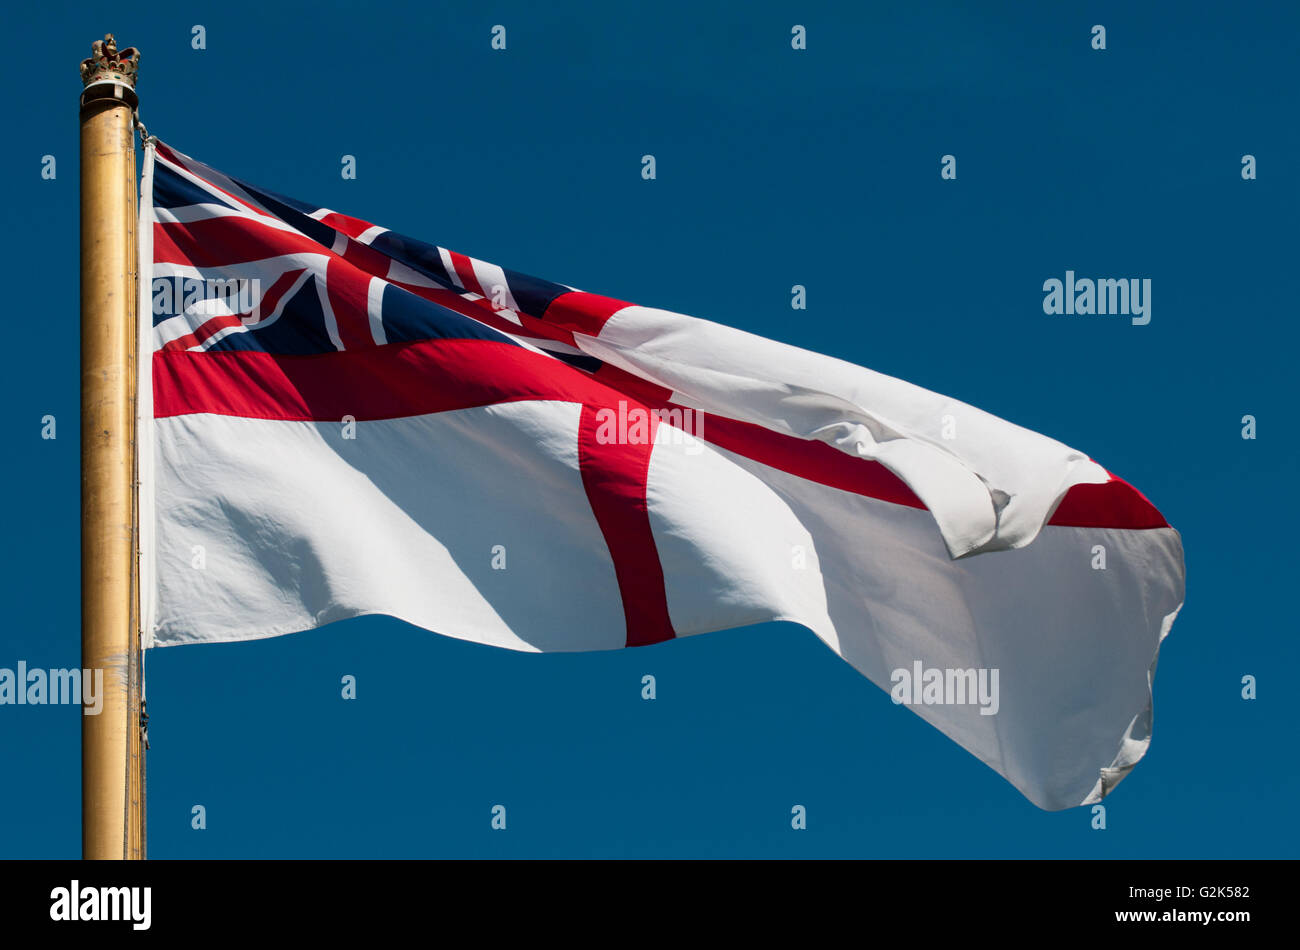 The White Ensign the flag of the Royal Navy which is flown by warships, submarines and establishments. Stock Photo